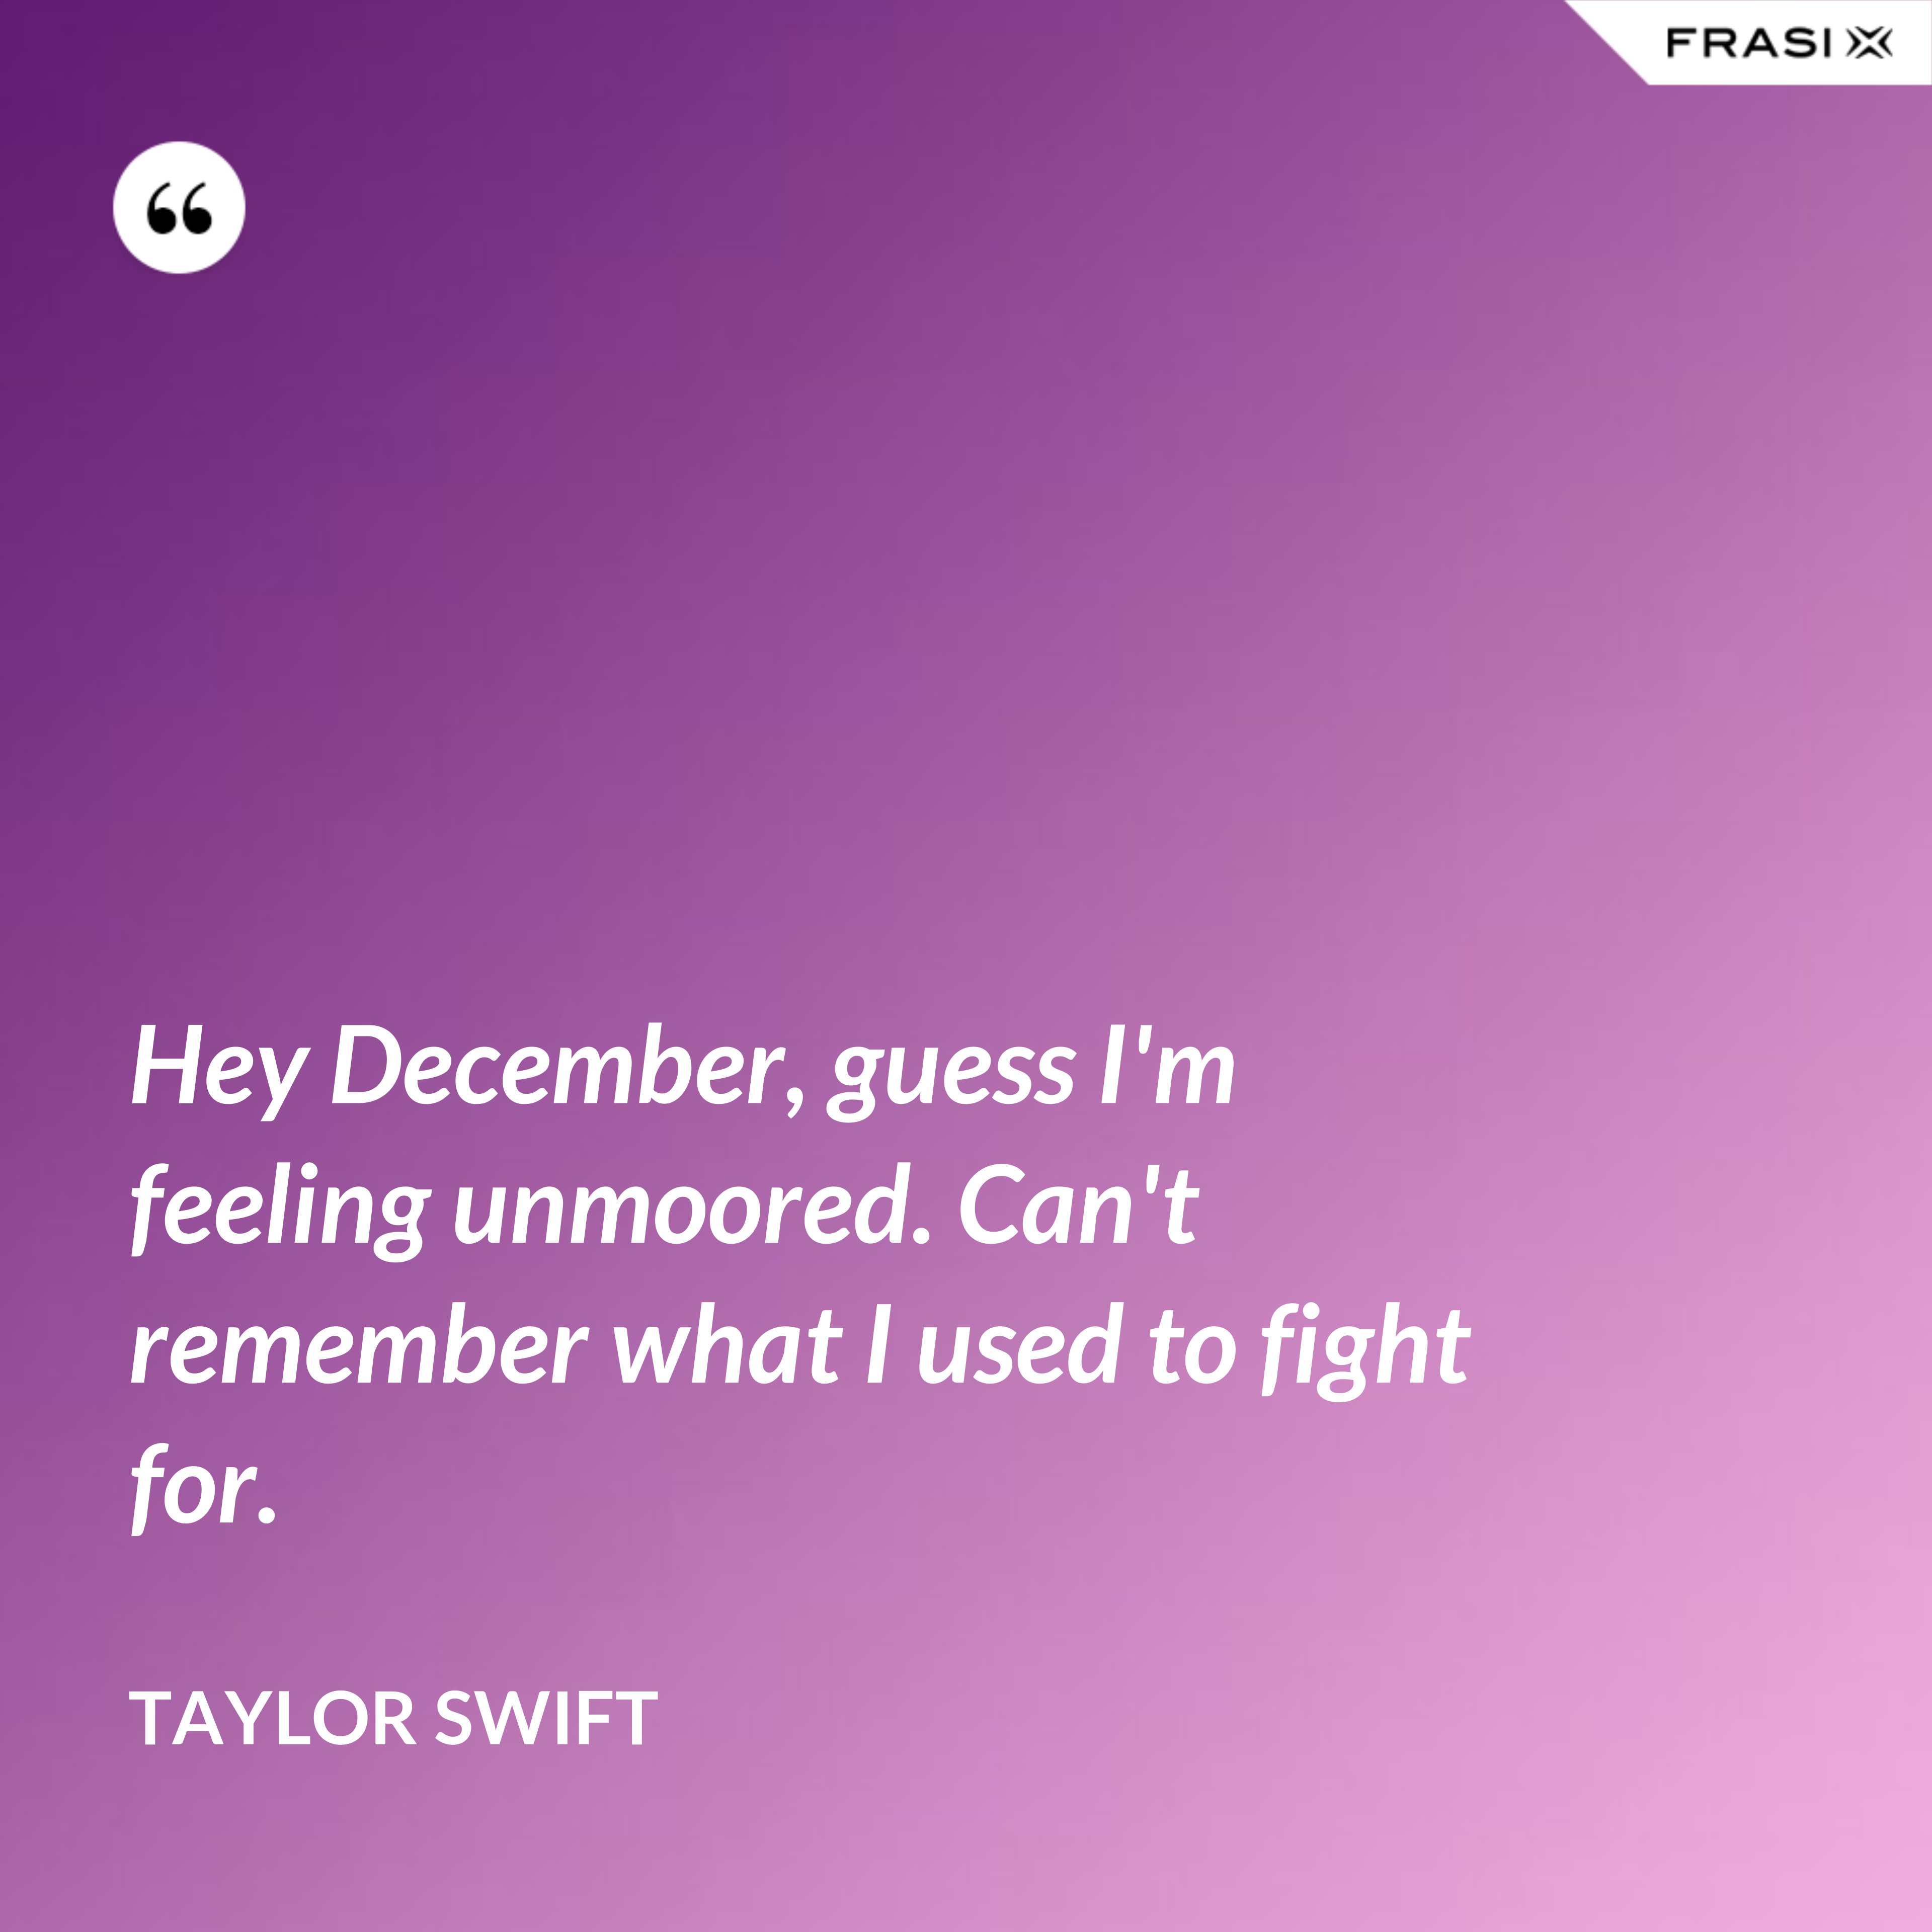 Hey December, guess I'm feeling unmoored. Can't remember what I used to fight for. - Taylor Swift